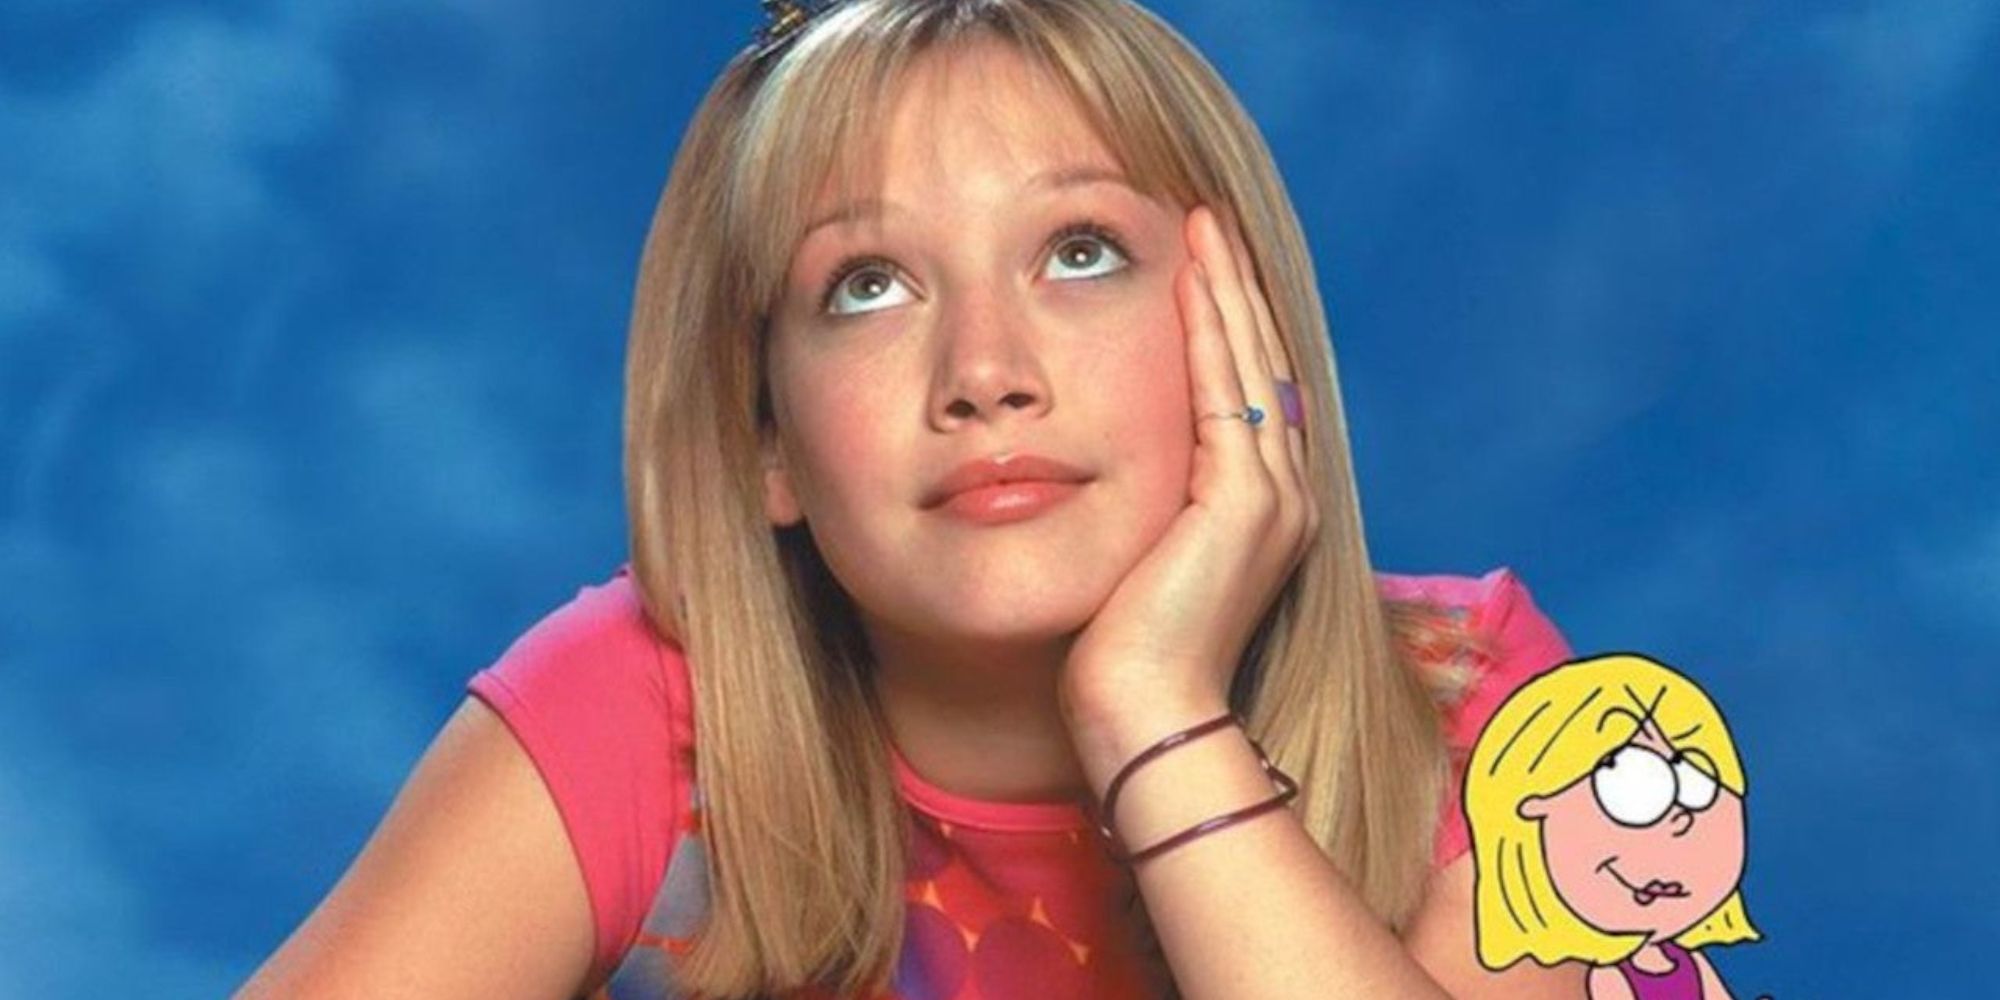 A screengrab of Lizzie McGuire from the show of the same name.